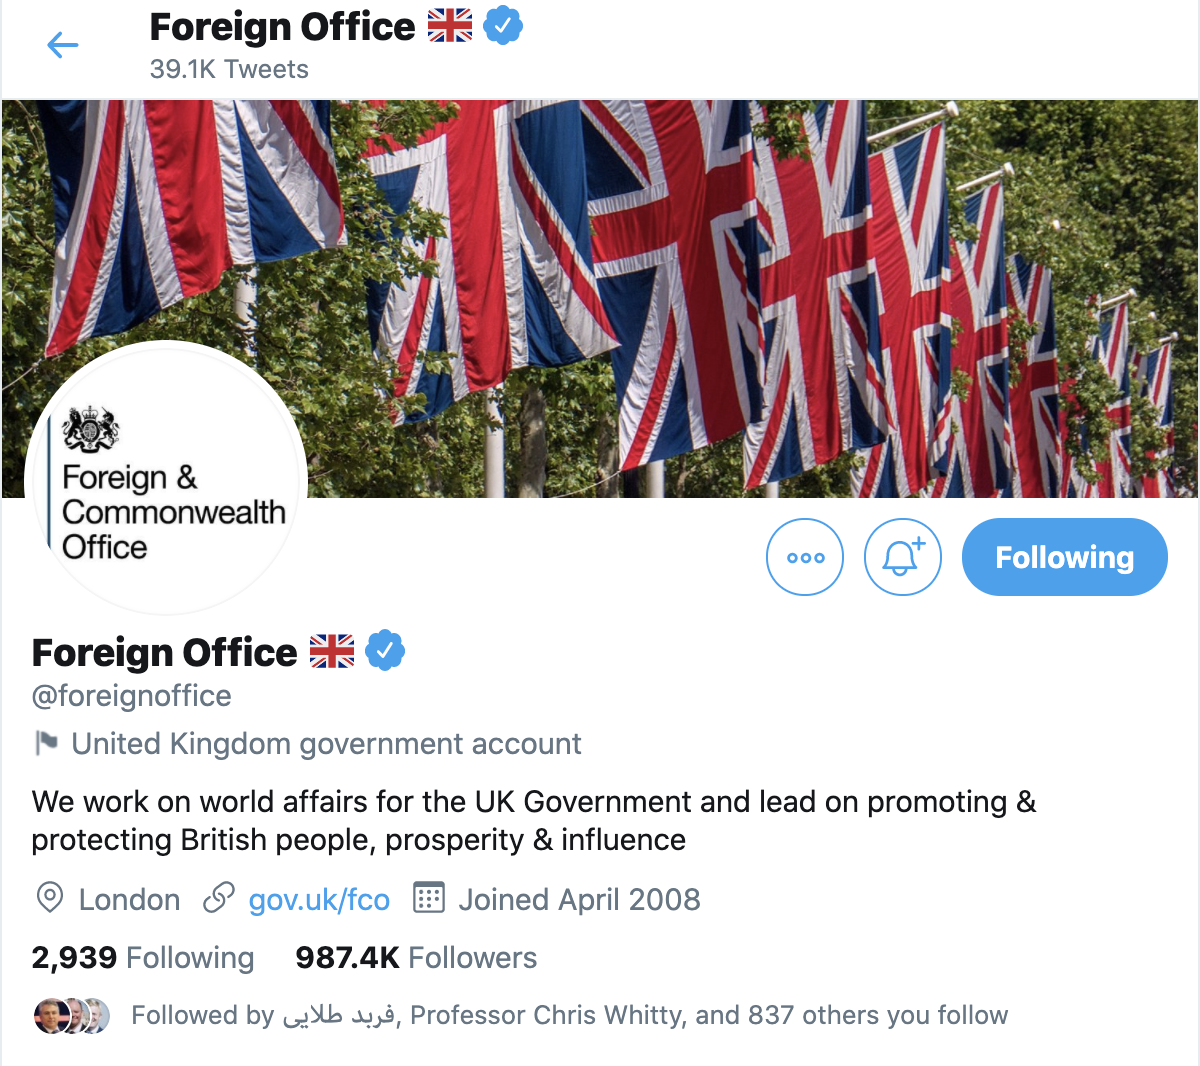 A few more interesting examples of how Twitter is applying the labels in relation to official government accounts. The State Department has been labelled, but the Pentagon has not. The UK Foreign Office has got a label, but the Ministry of Defence has not